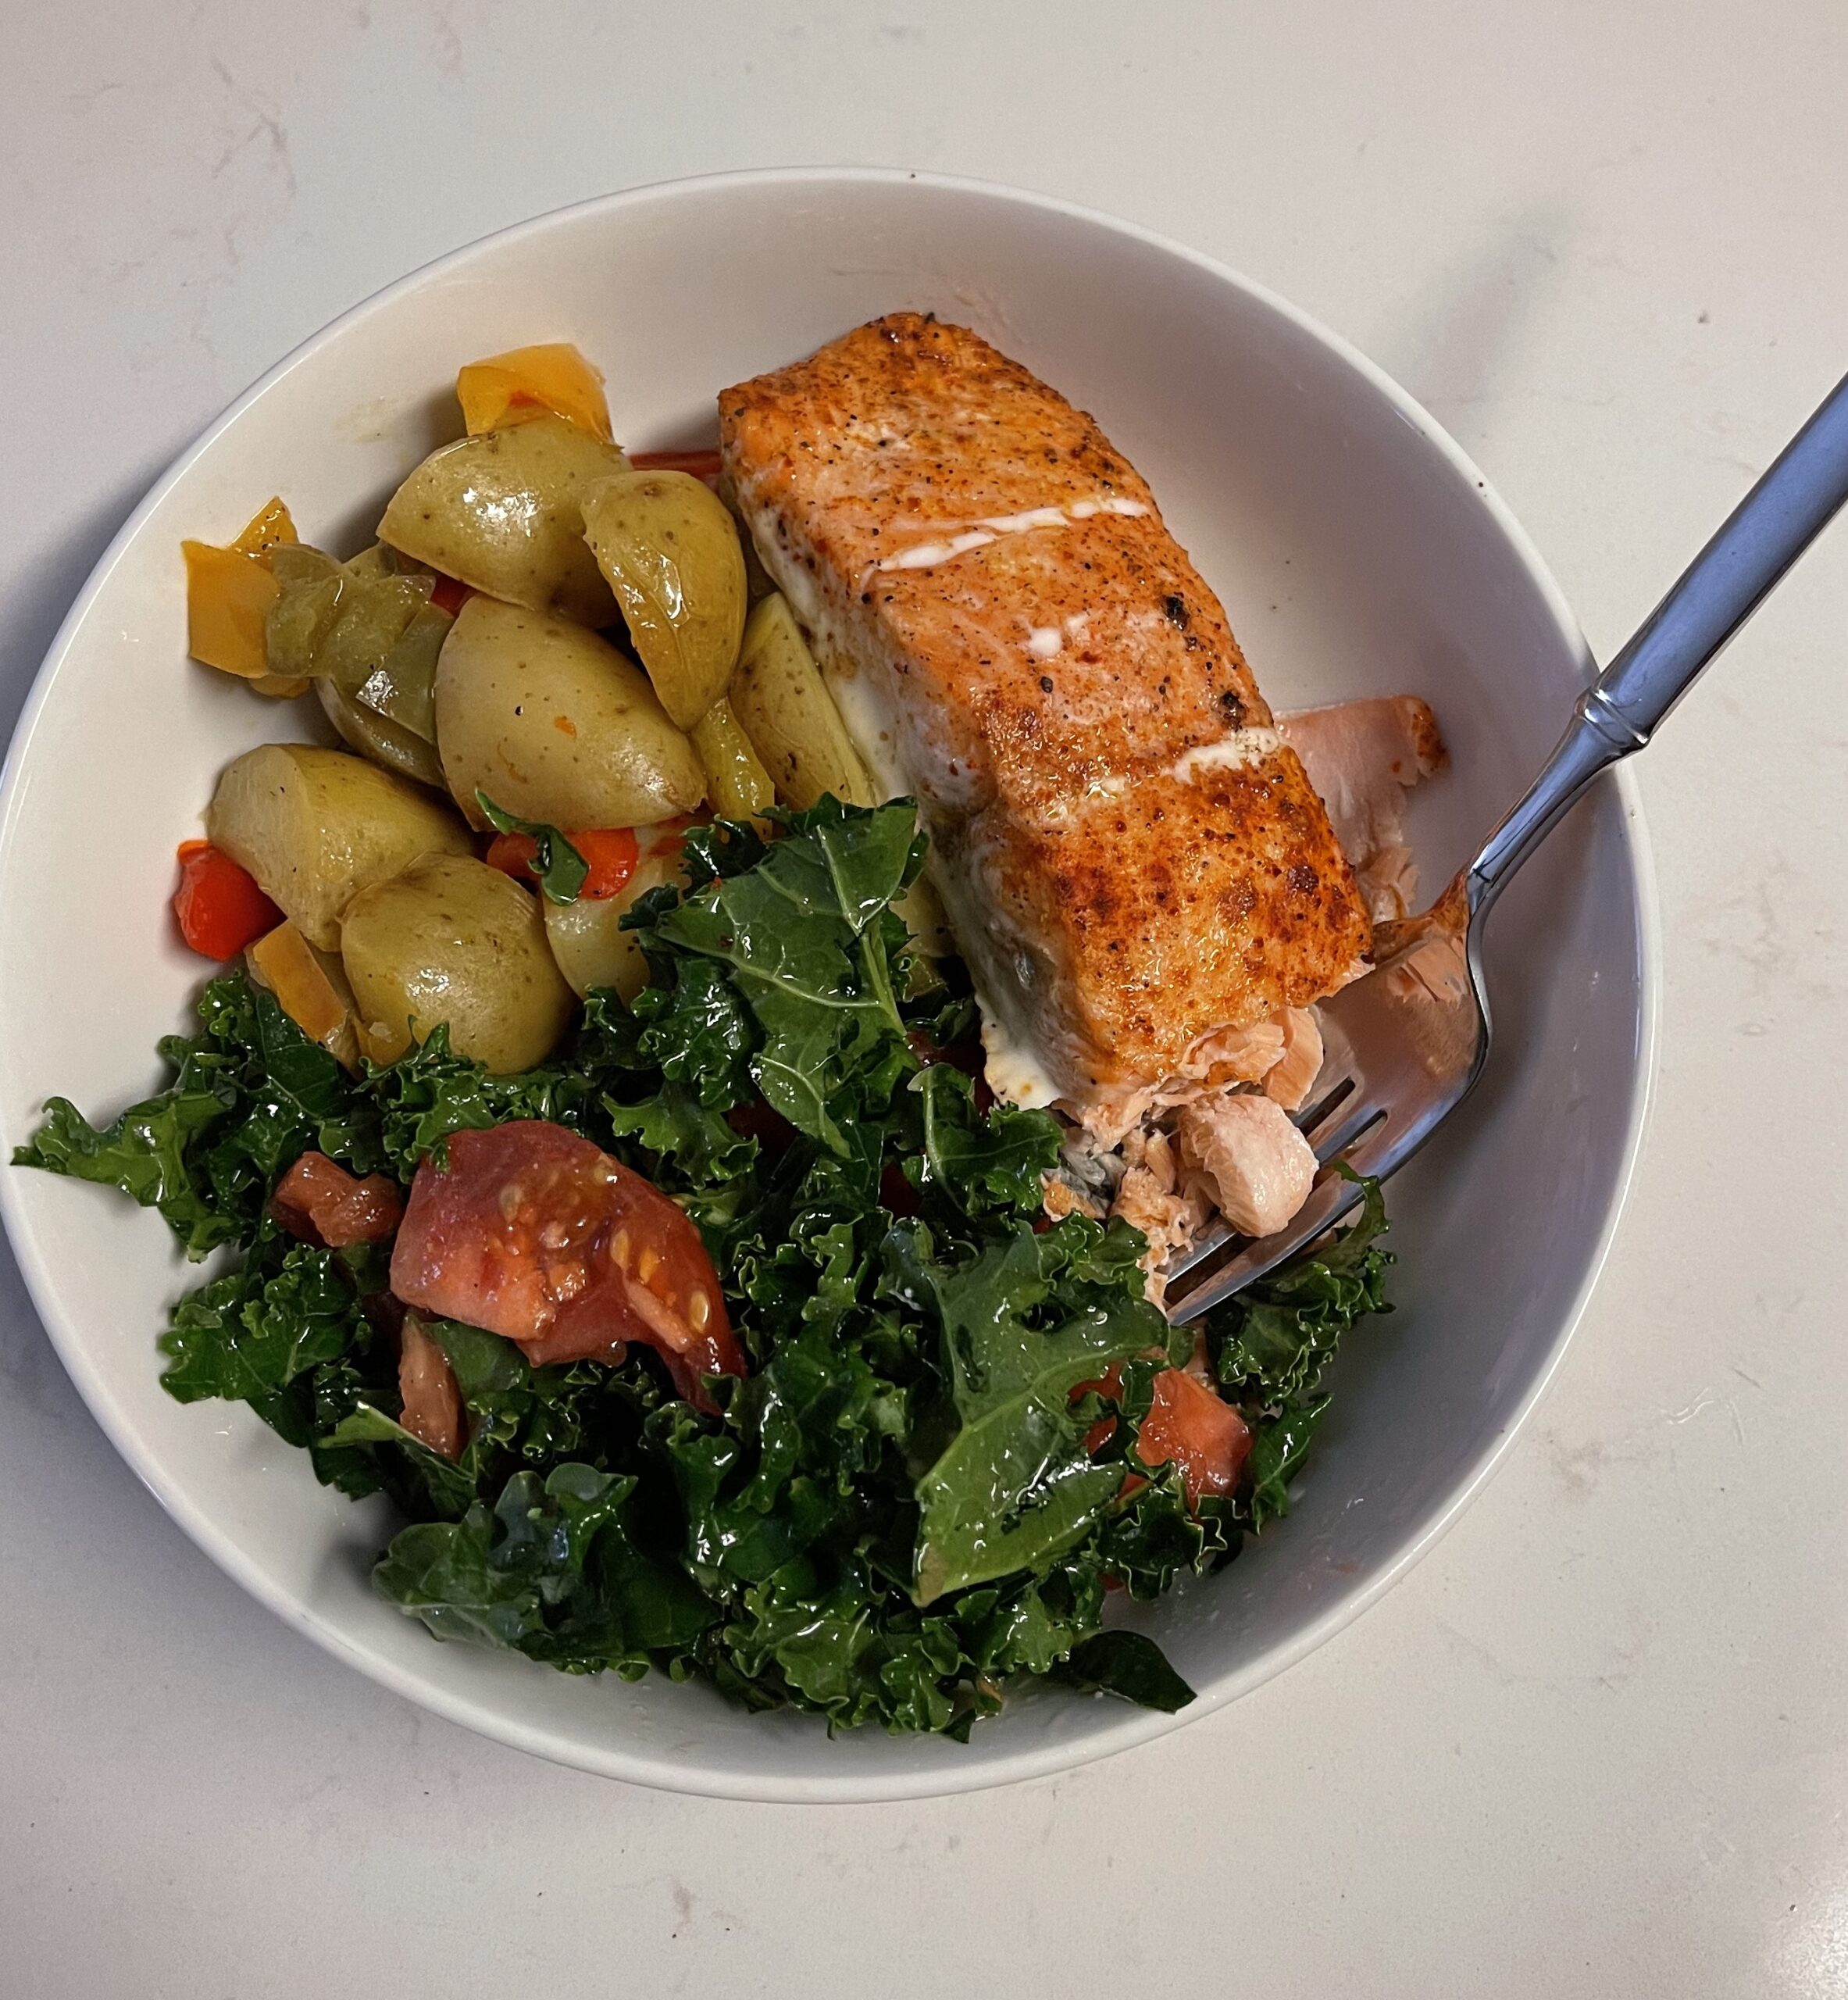 Looking for a simple salmon dinner that will keep you full and satisfied? Check out this recipe!